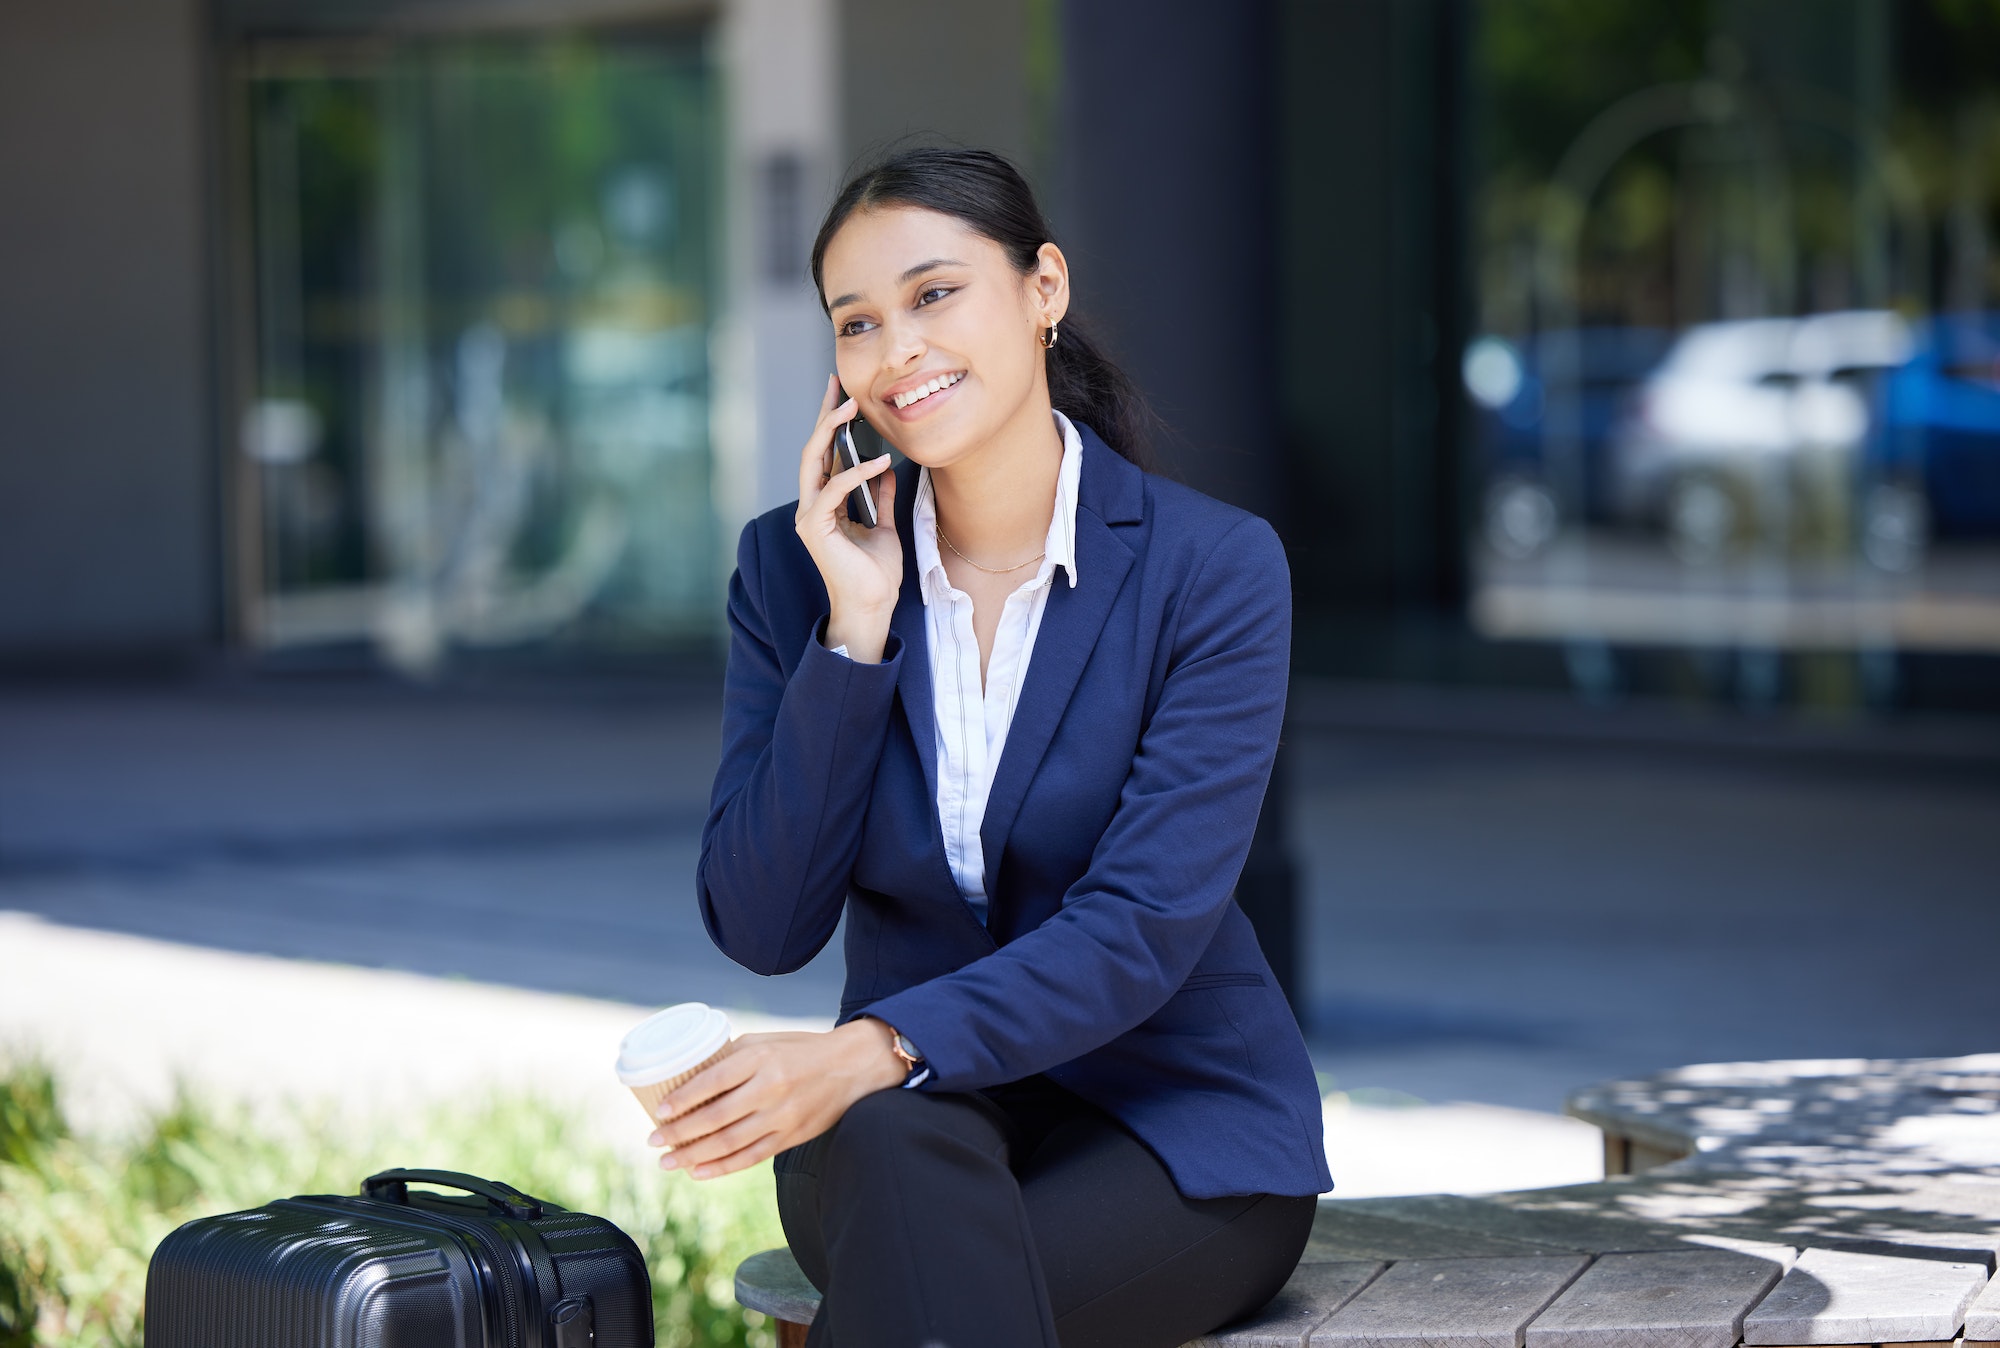 Contact, strategy and phone call by woman travel business, planning while sitting in a city on a co